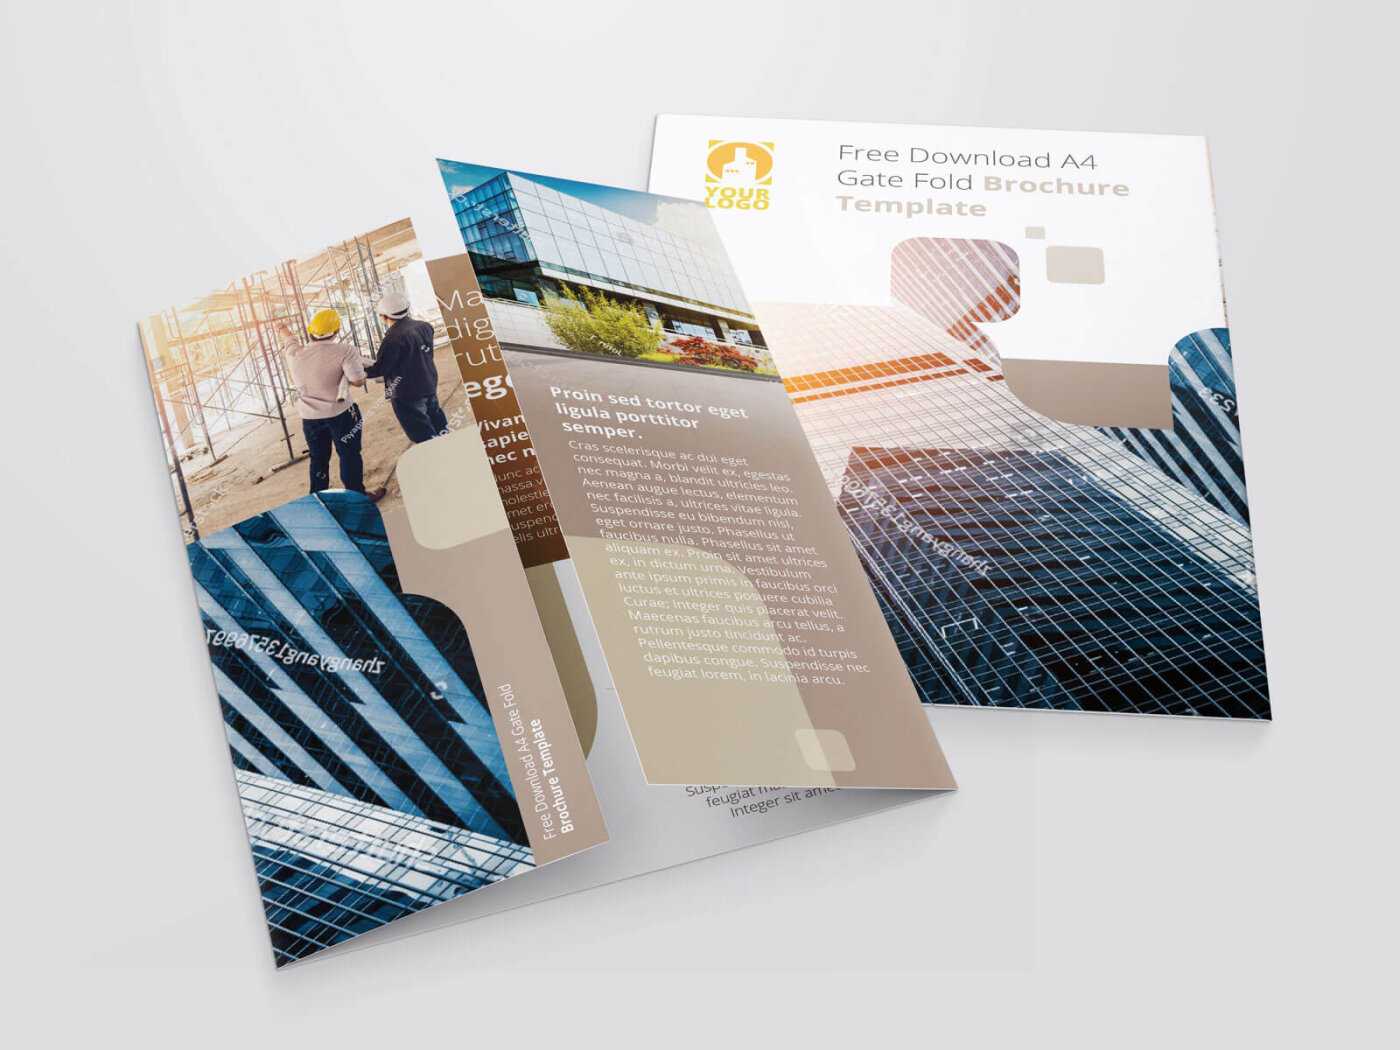 Free Download A4 Gate Fold Brochure Template | Vectogravic Intended For Gate Fold Brochure Template